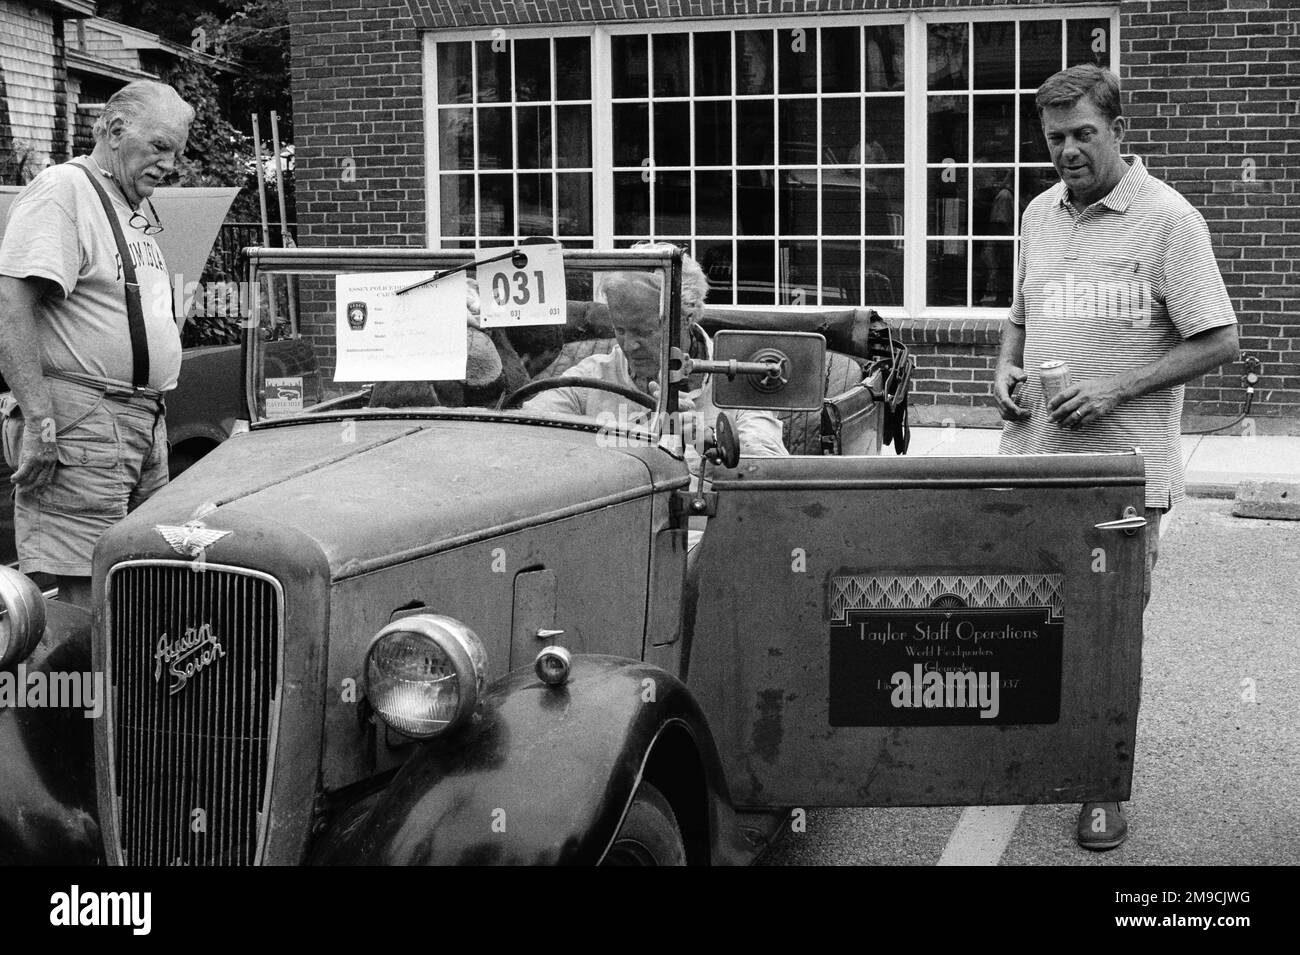 Three men gathered around a weathered vintage Austin Seven automobile at a car show in Essex, Massachusetts. The image was captured on black and white Stock Photo